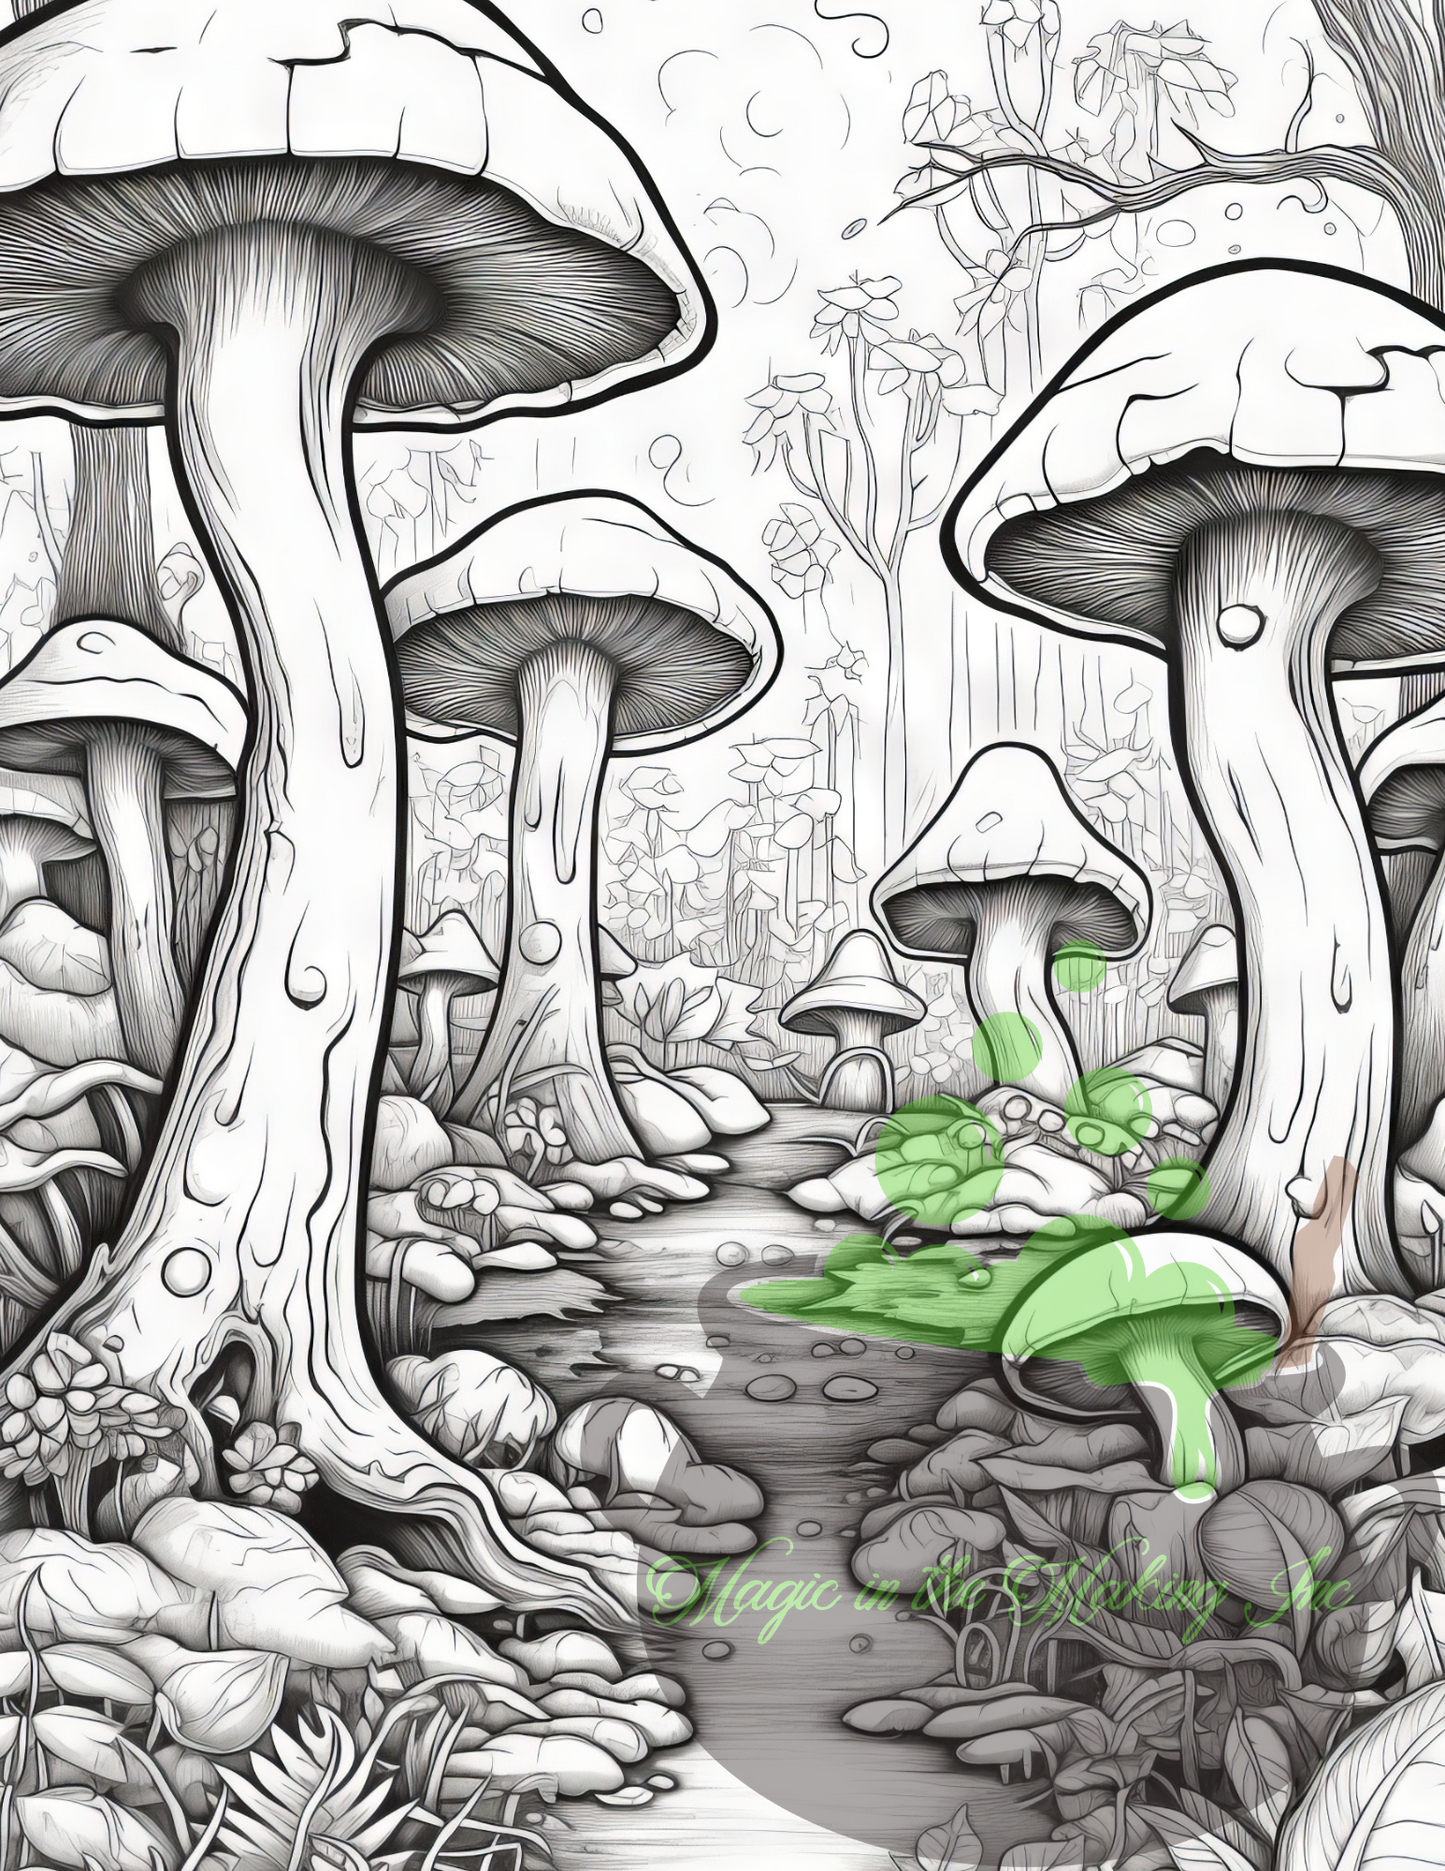 The Fantasy Forest Digital Coloring Book